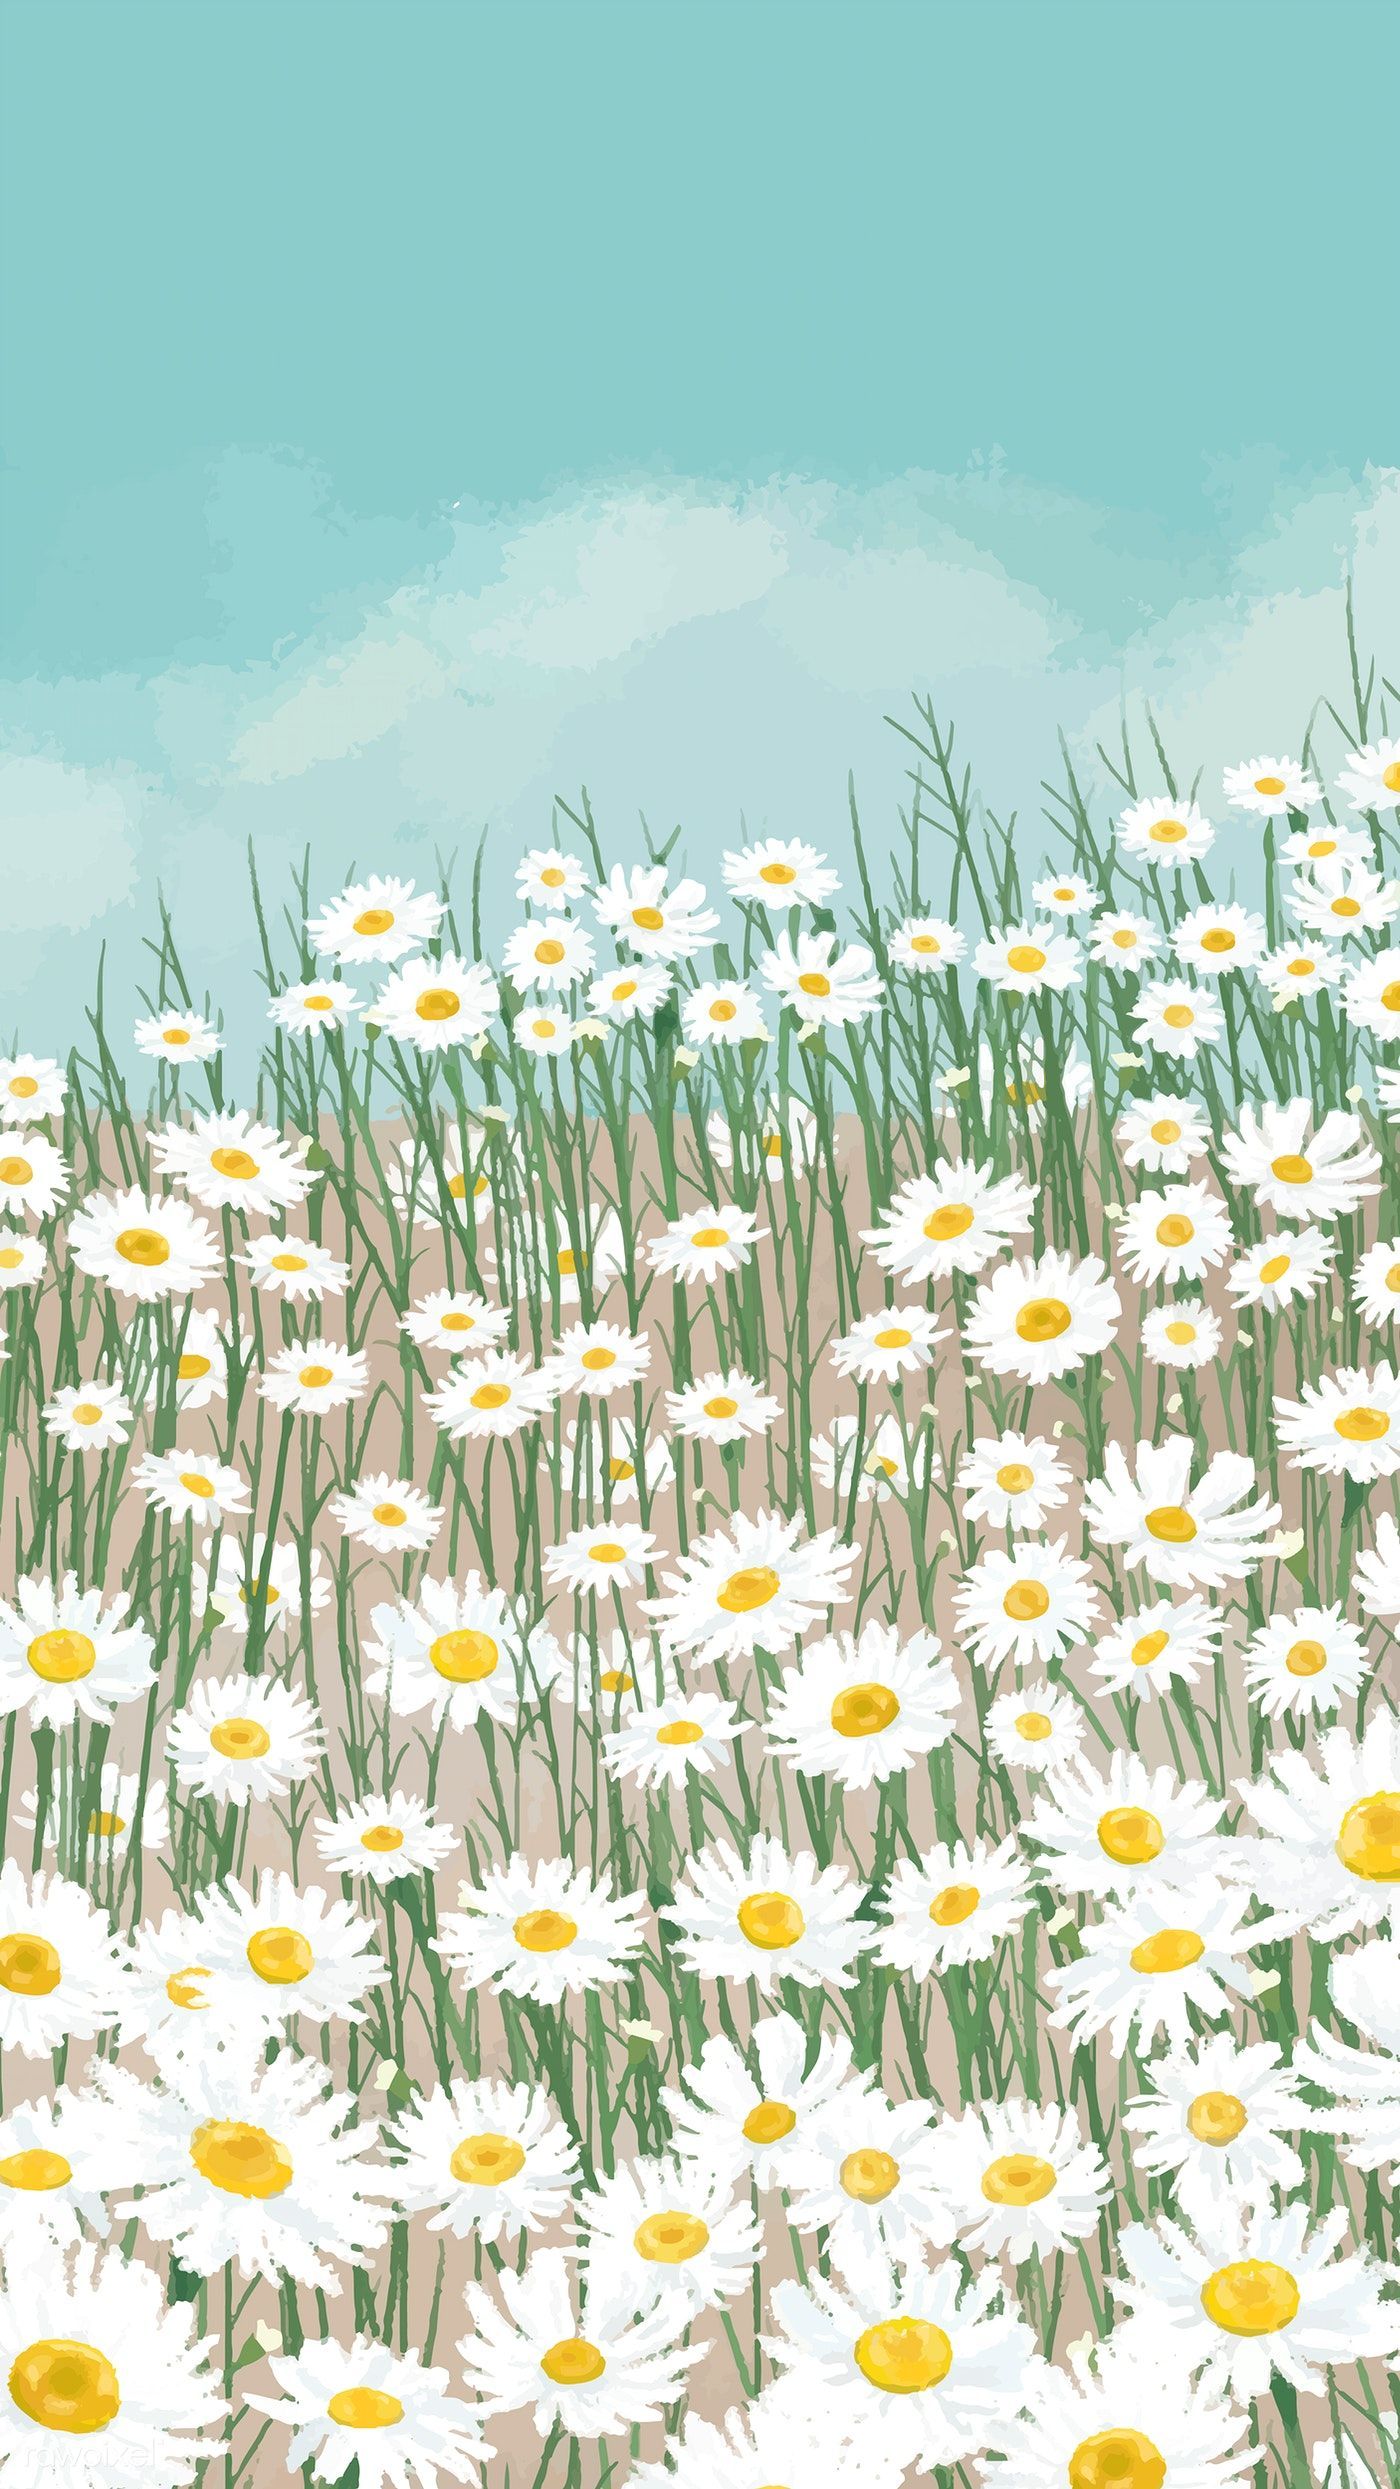 IPhone wallpaper of a field of daisies - Spring, daisy, illustration